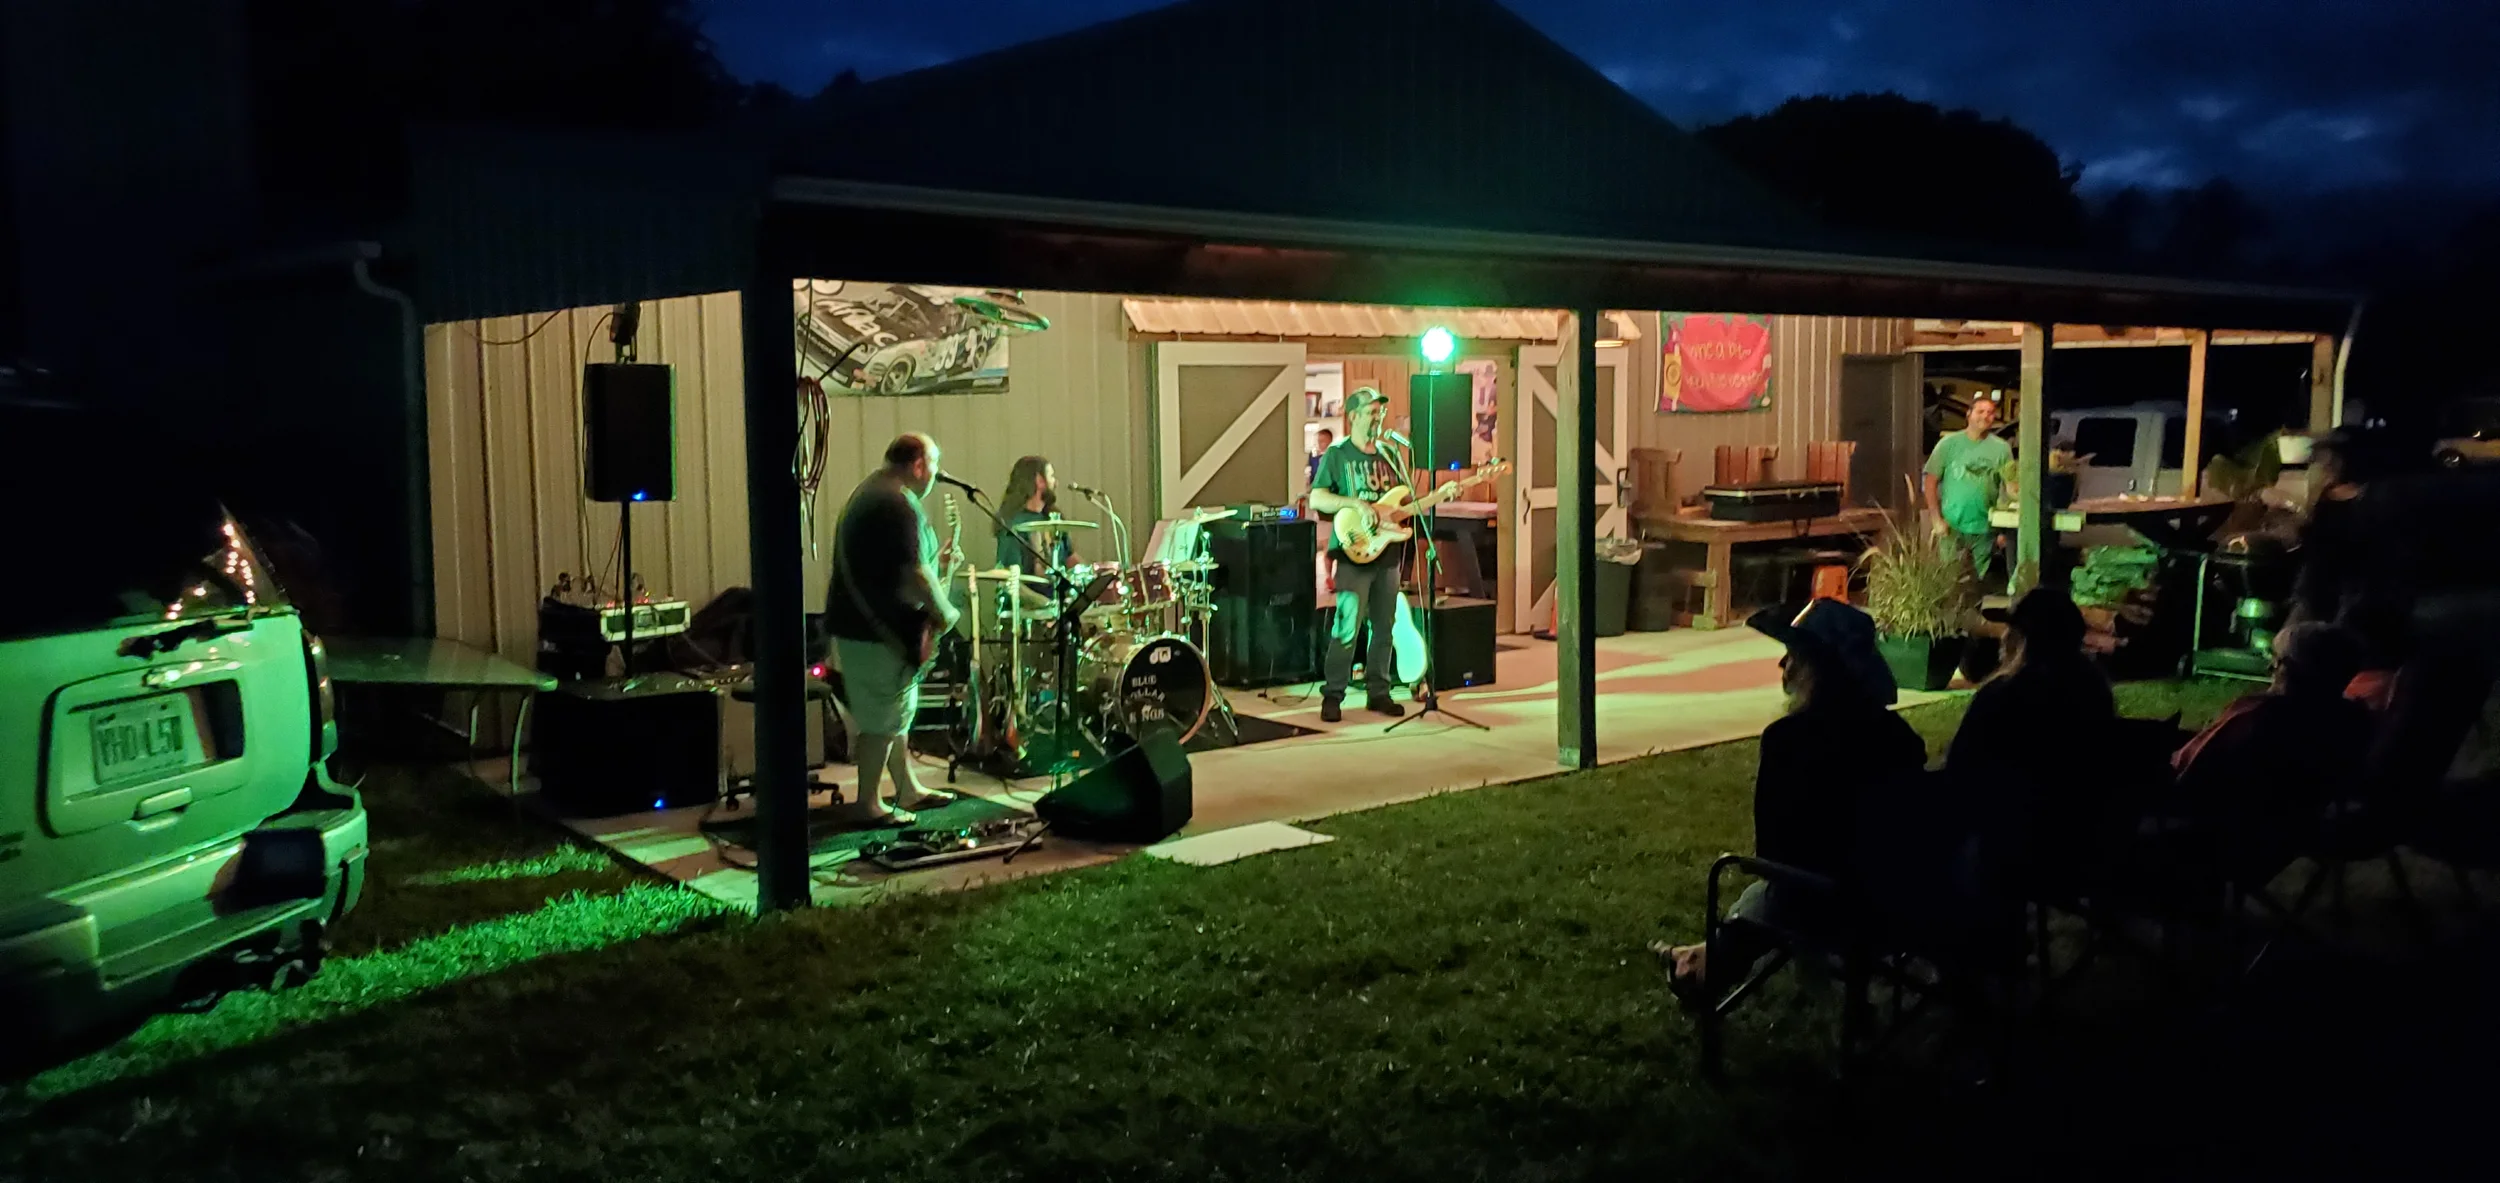 The Blue Collar Kings playing music at the Sidetrack RV Park barn